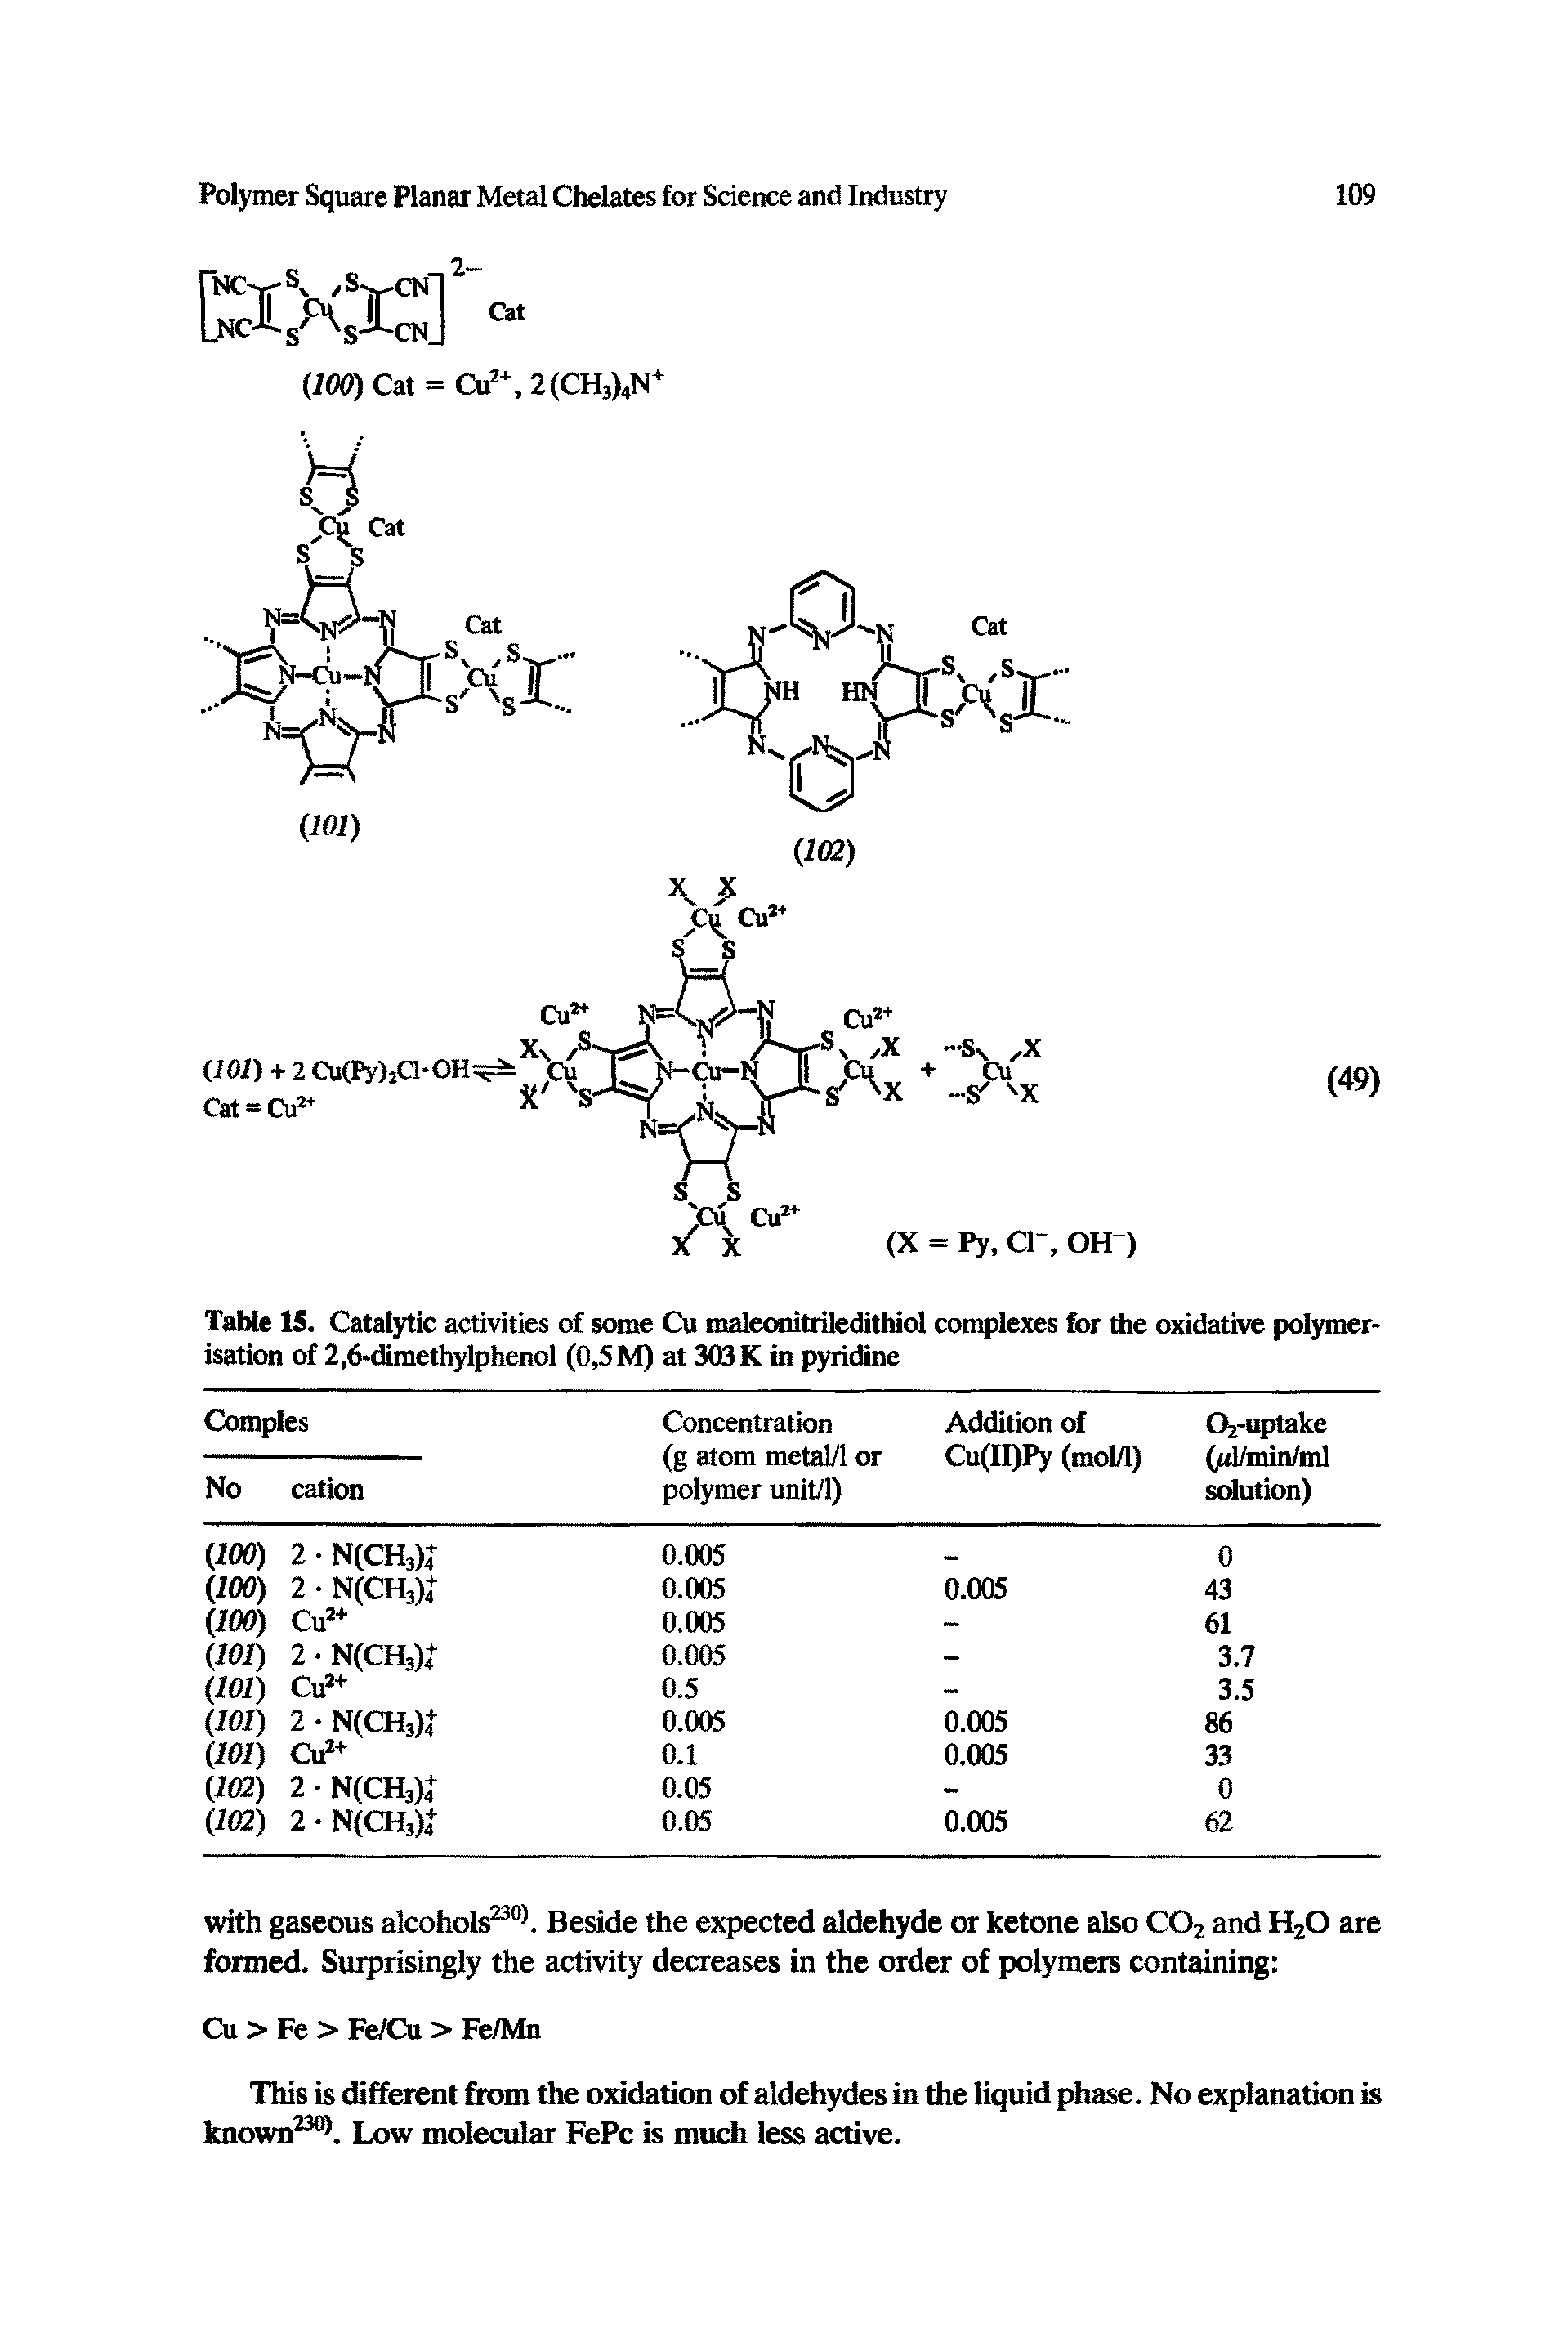 Table 15. Catalytic activities of some Cu malemiitriledithiol complexes for the oxidative polymerisation of 2,6-dimethylphenol (0,5 M) at 303 K in pyridine...